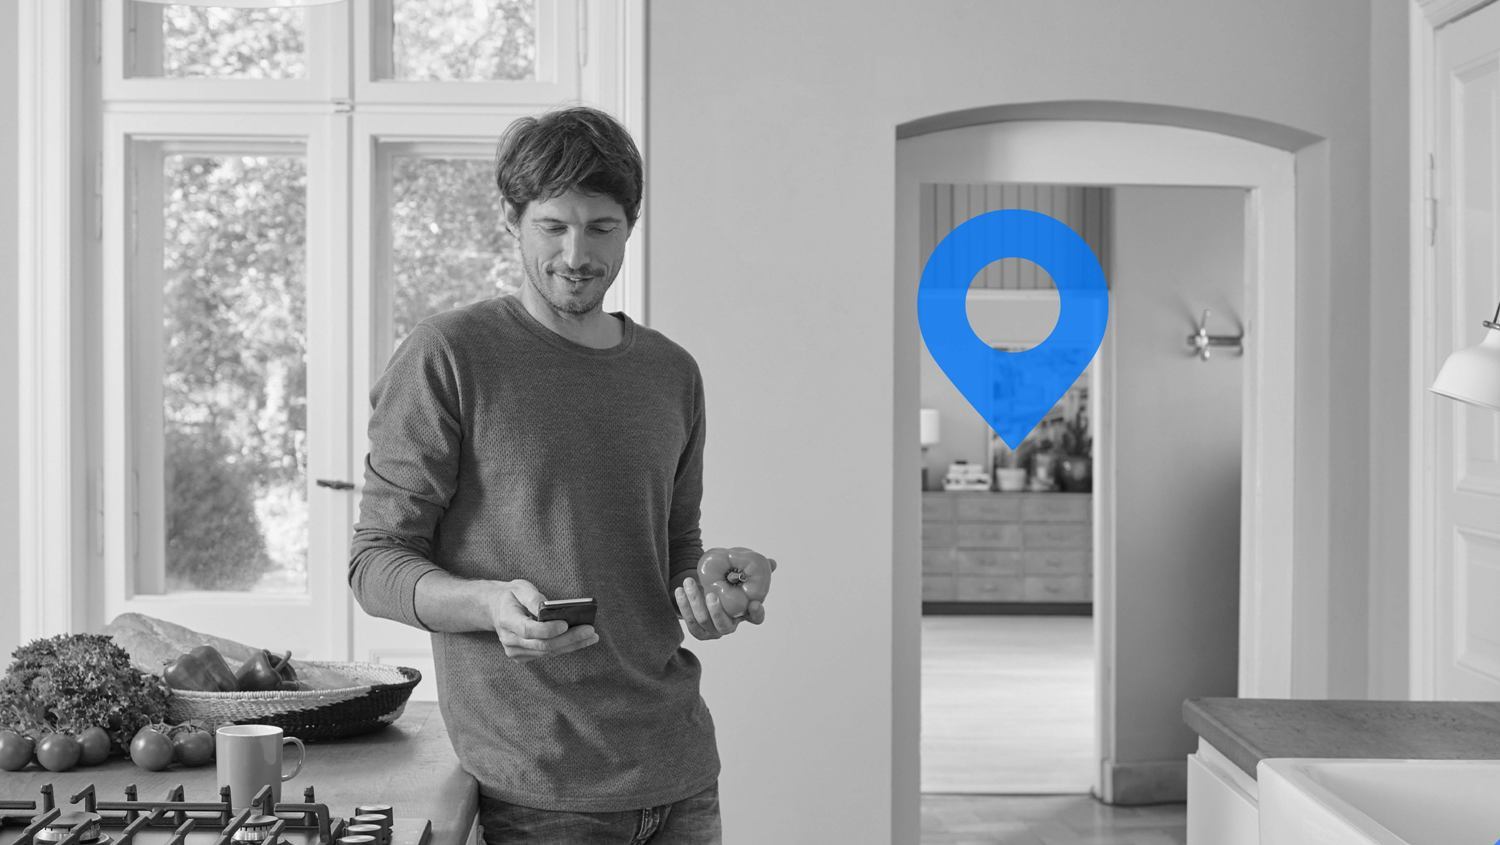 Bluetooth 5.1 will gain accurate “location detection” capability